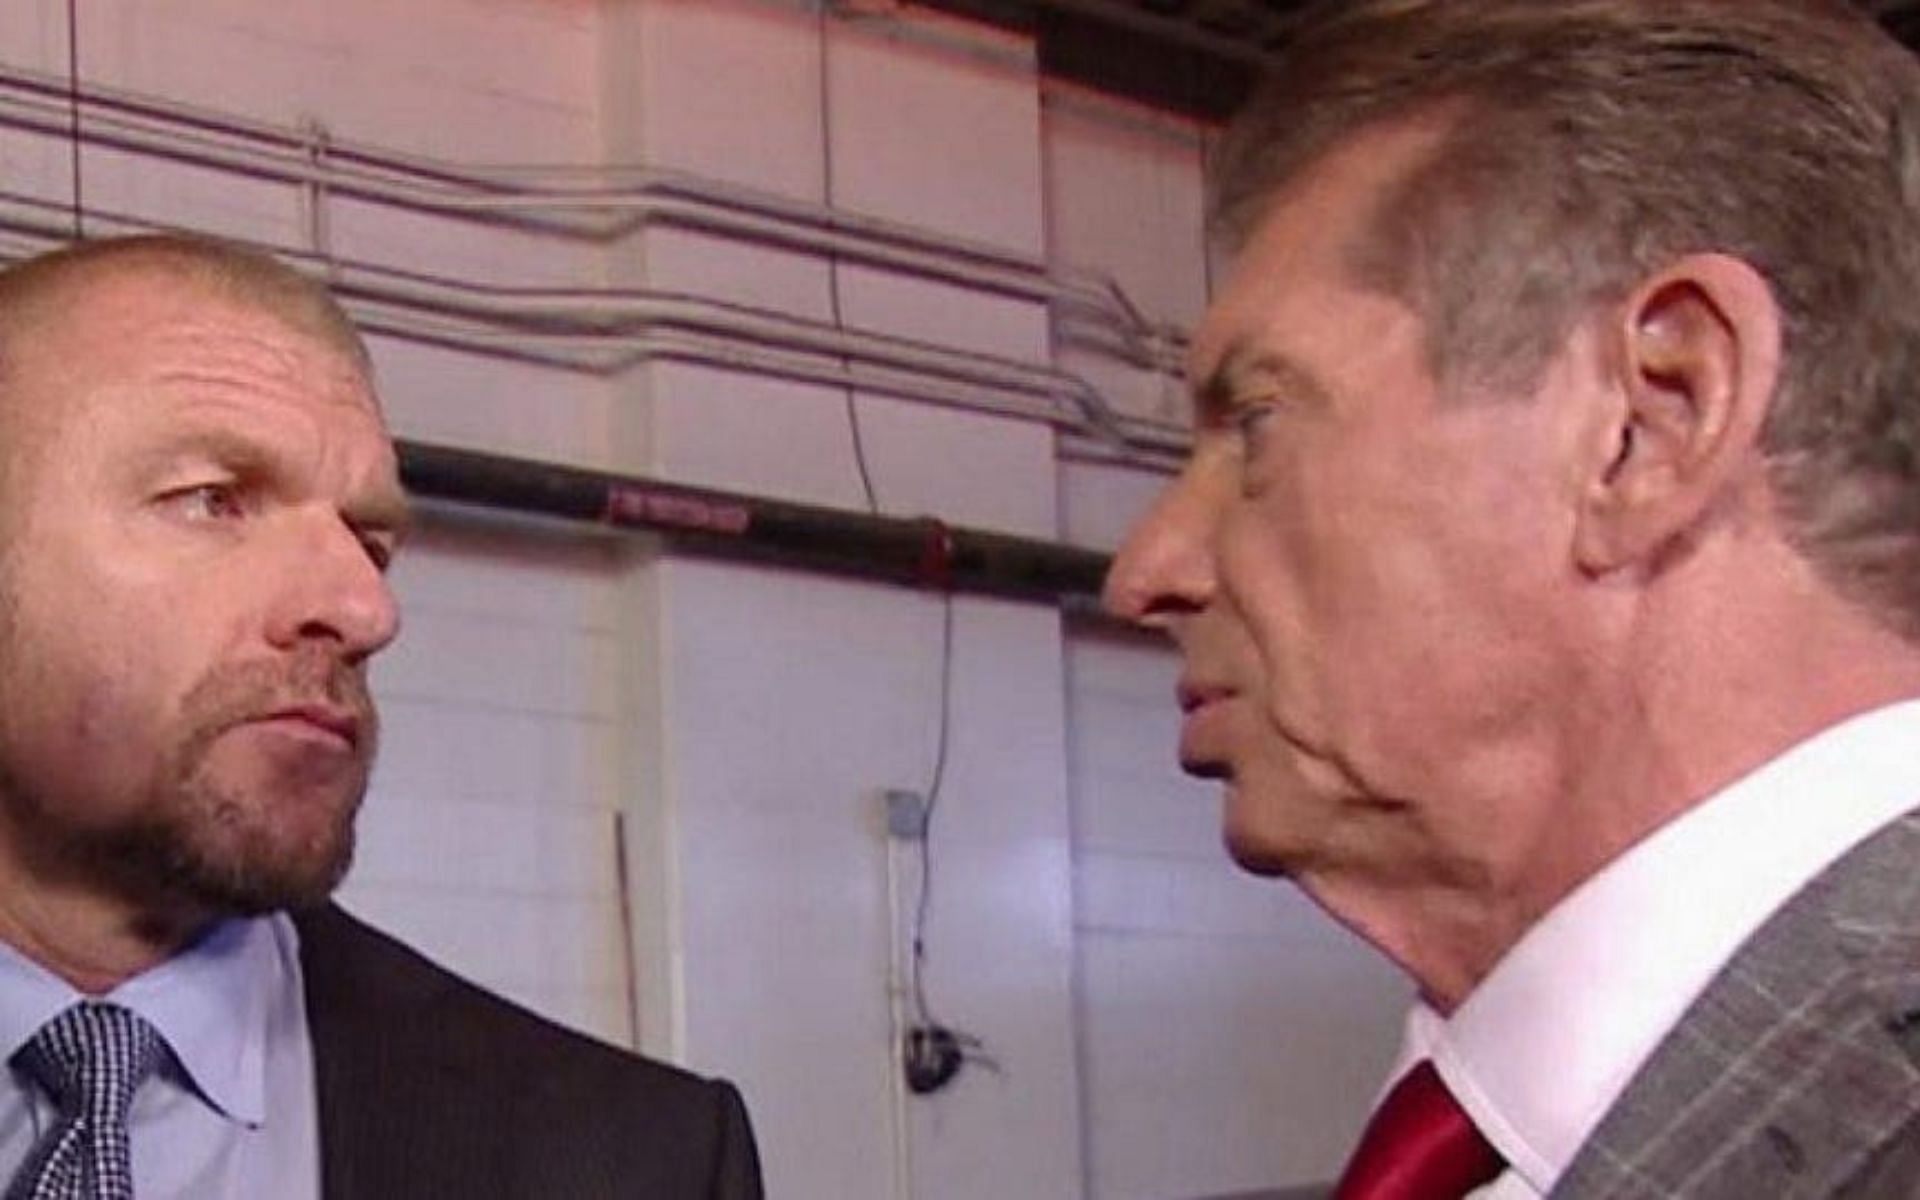 WWE Personalities, Triple H and Vince McMahon